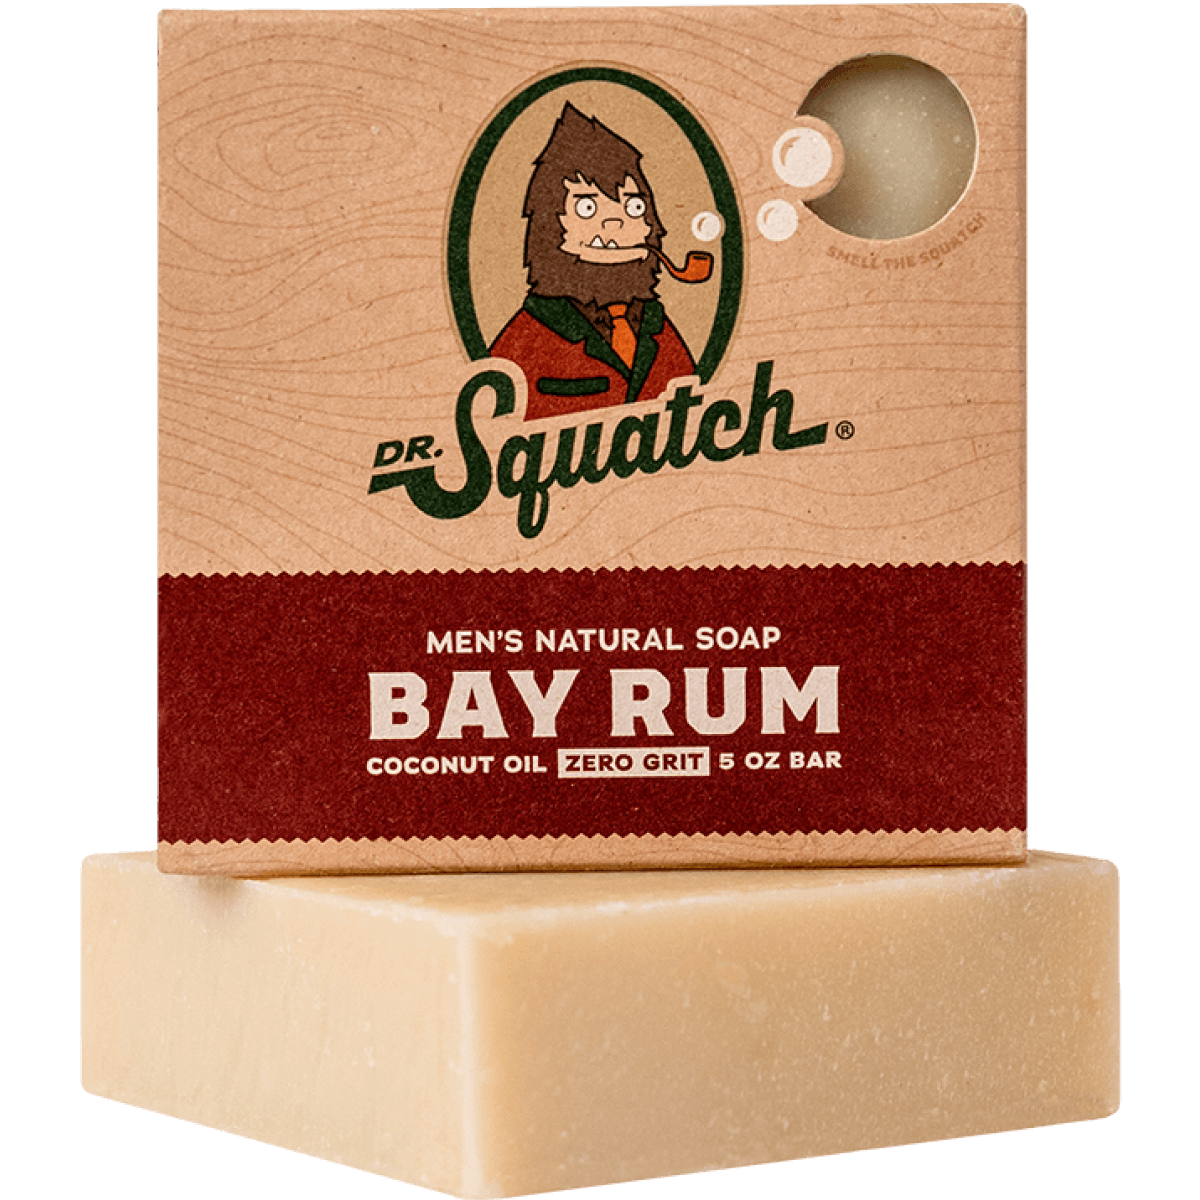 Bay Rum is my number 1 favorite : r/DrSquatch